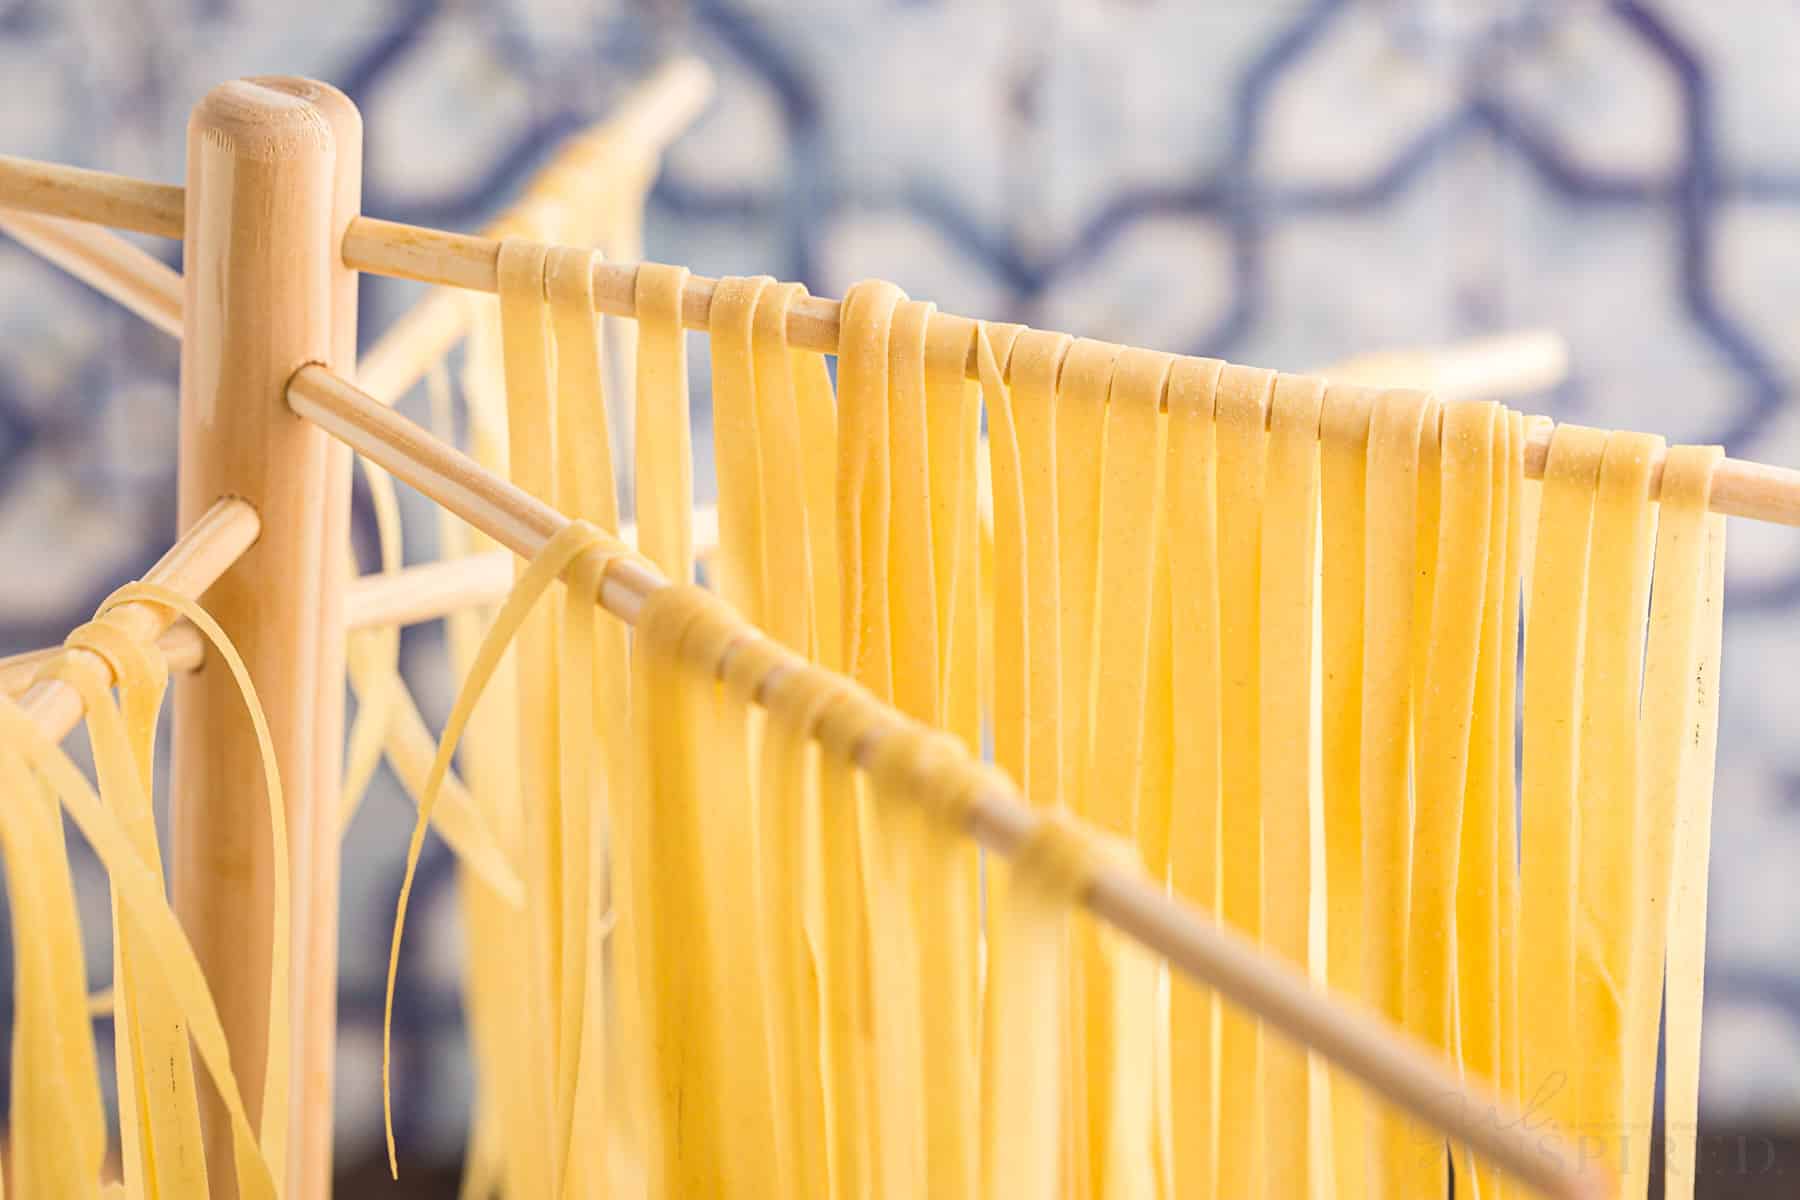 Thin fettuccine strips of homemade pasta hanging to dry on a pasta rack, blue and white tiles in the background.